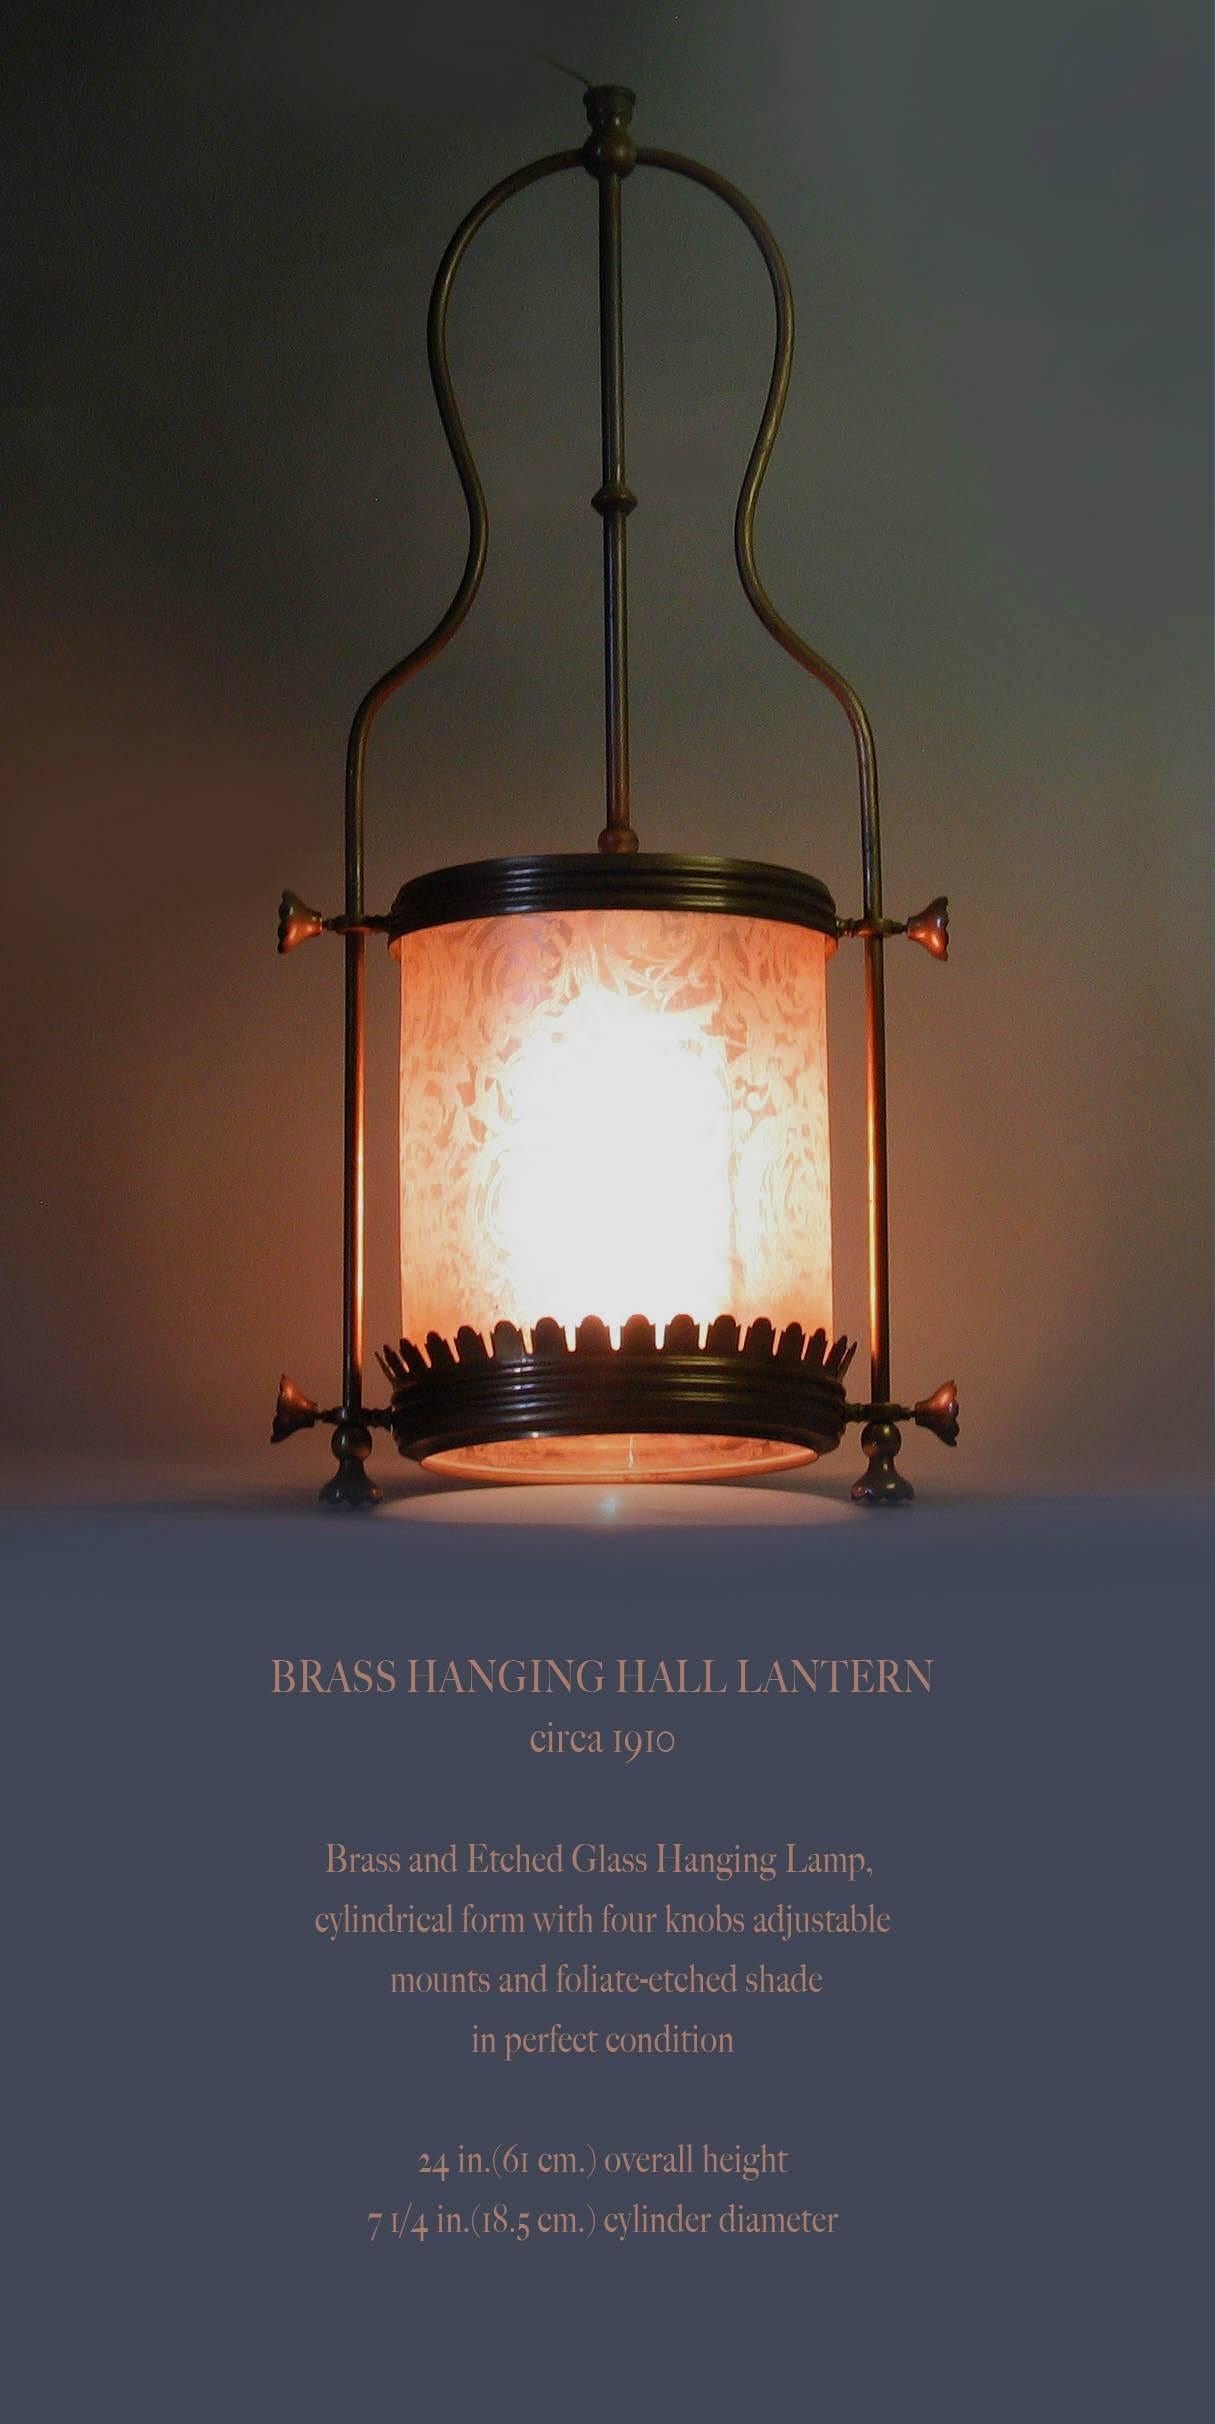 A brass hanging hall lantern, circa 1910, a brass and etched hanging lamp, cylindrical form with four knobs adjustable mounts and foliate-etched in perfect condition. The hanging lantern measures 24